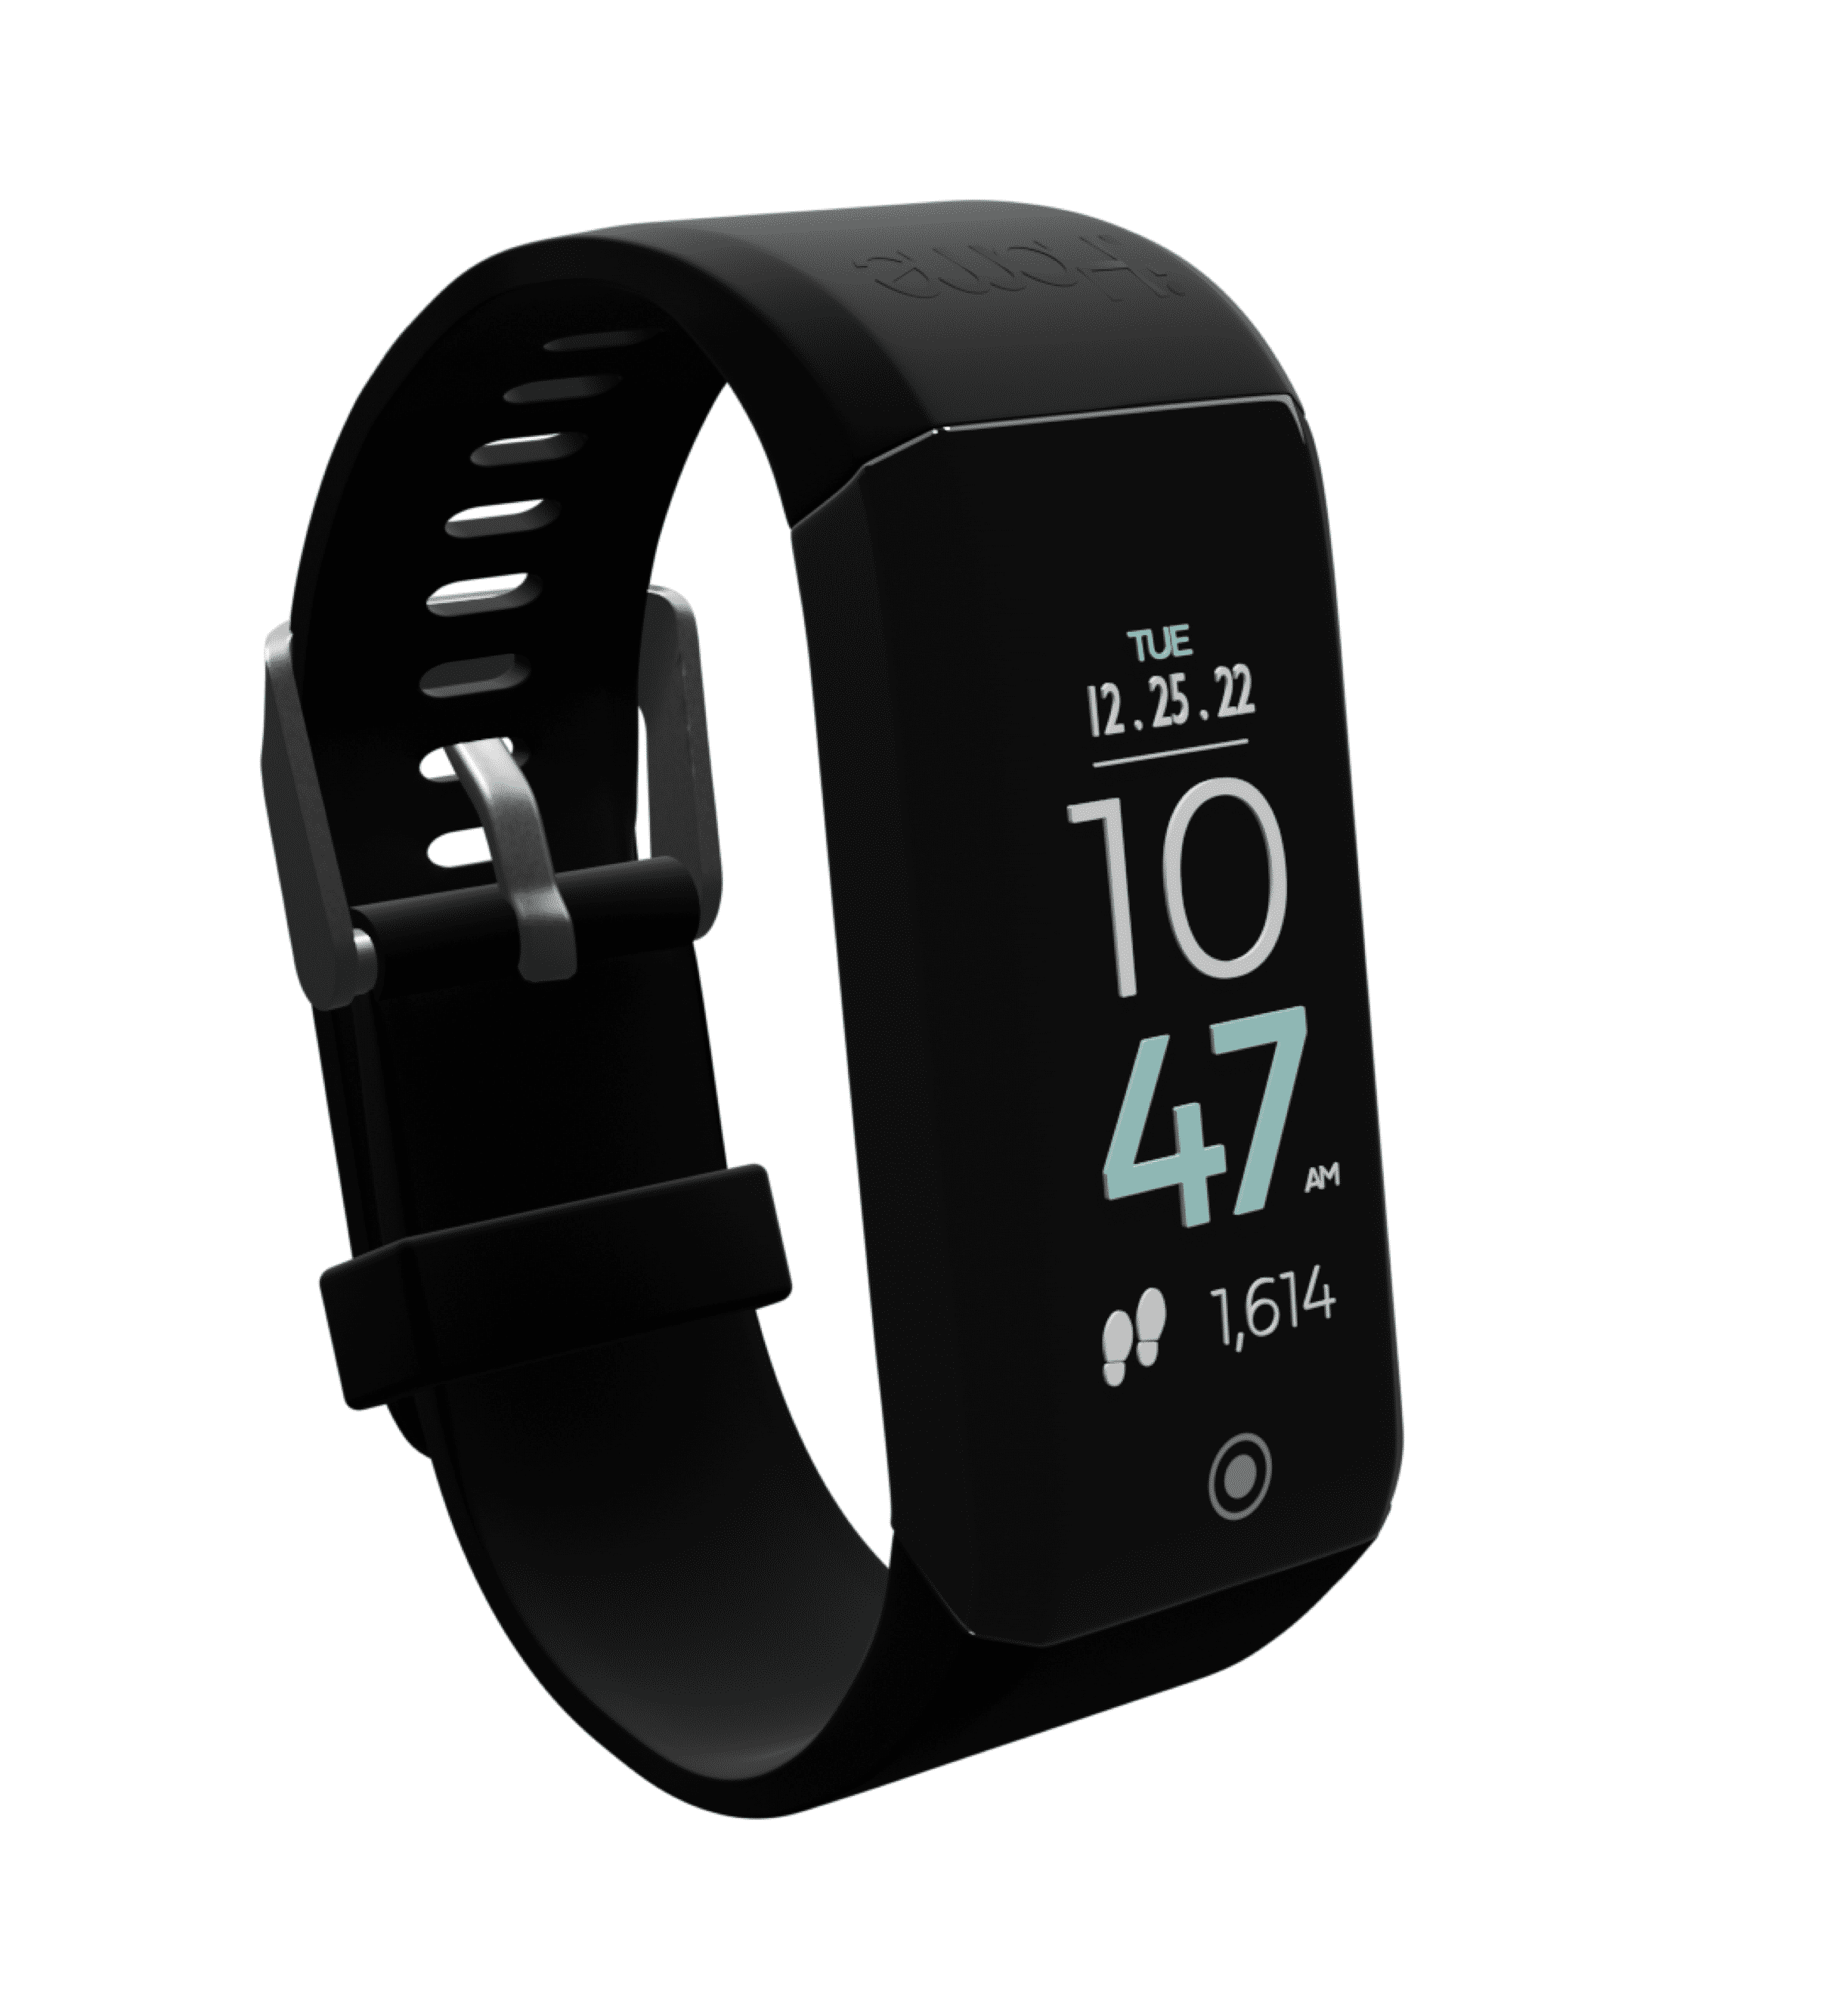 iHome Smart Health Band, Activity Tracker Watch with Heart Rate